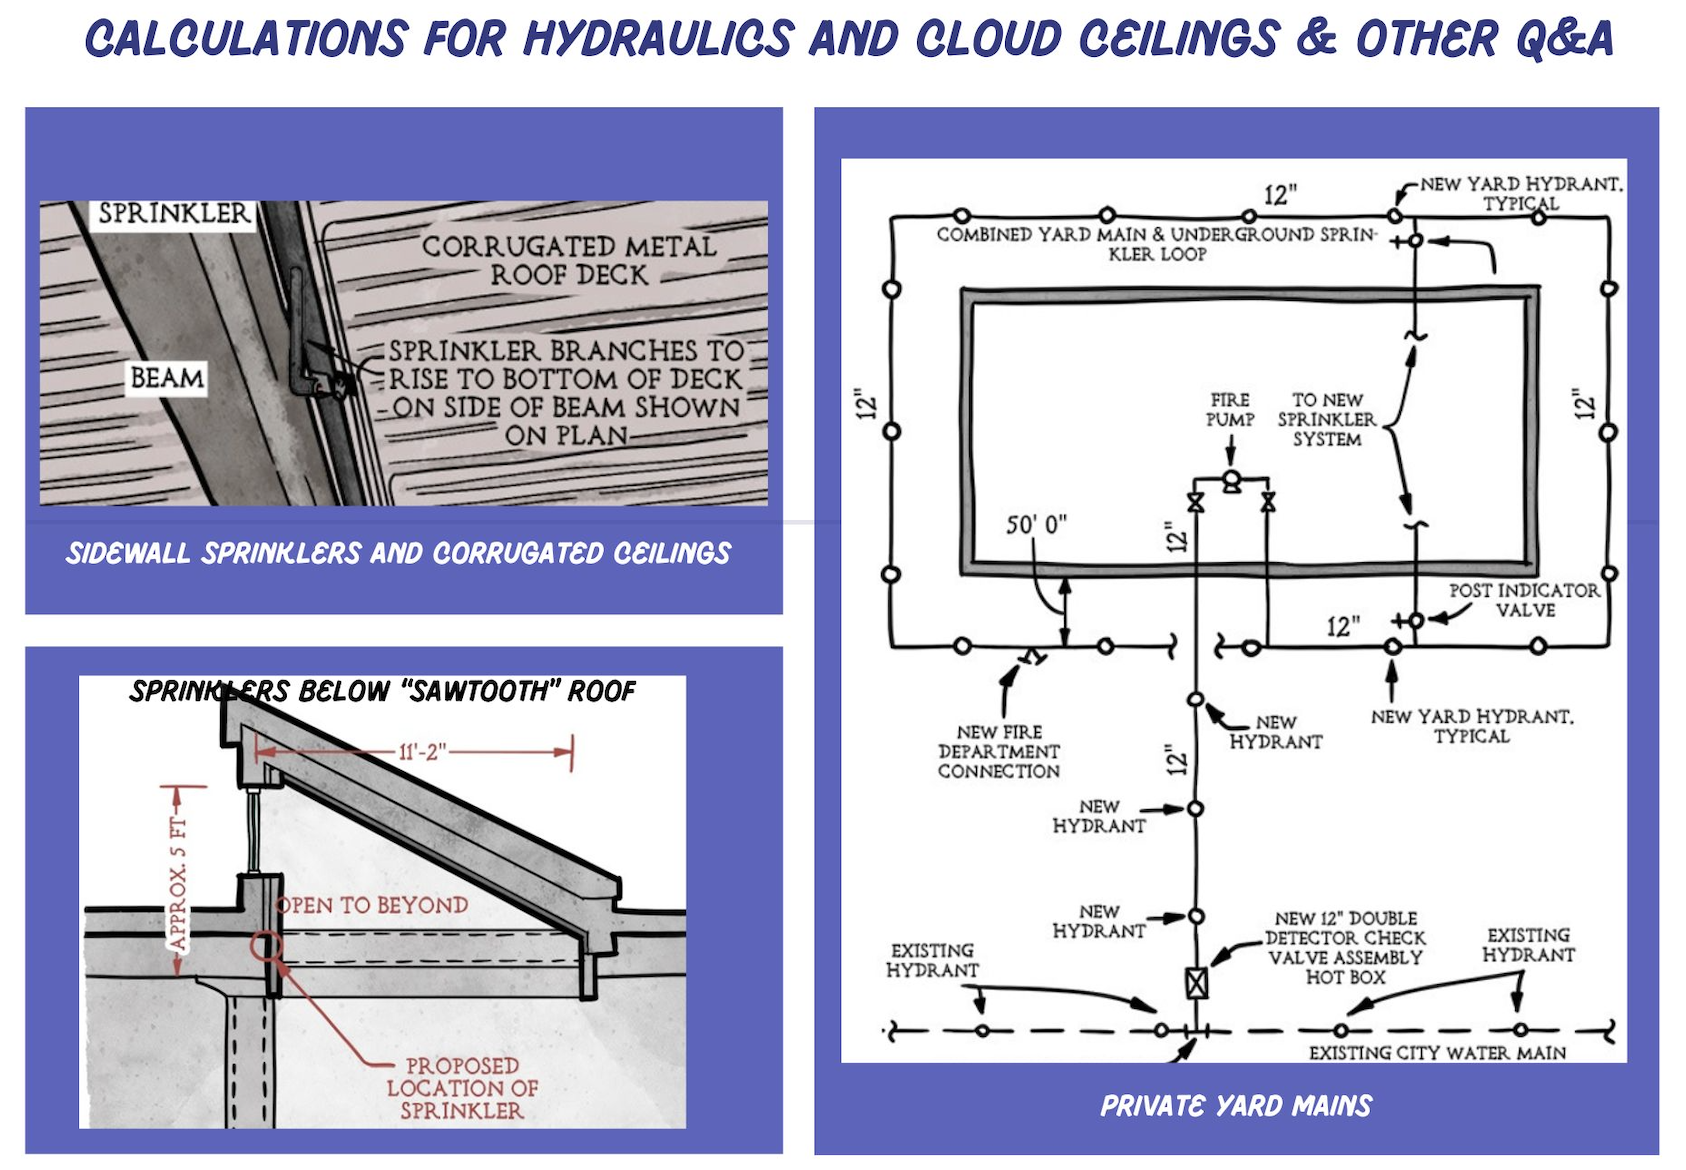 CALCULATIONS FOR HYDRAULICS AND CLOUD CEILINGS & OTHER Q&A